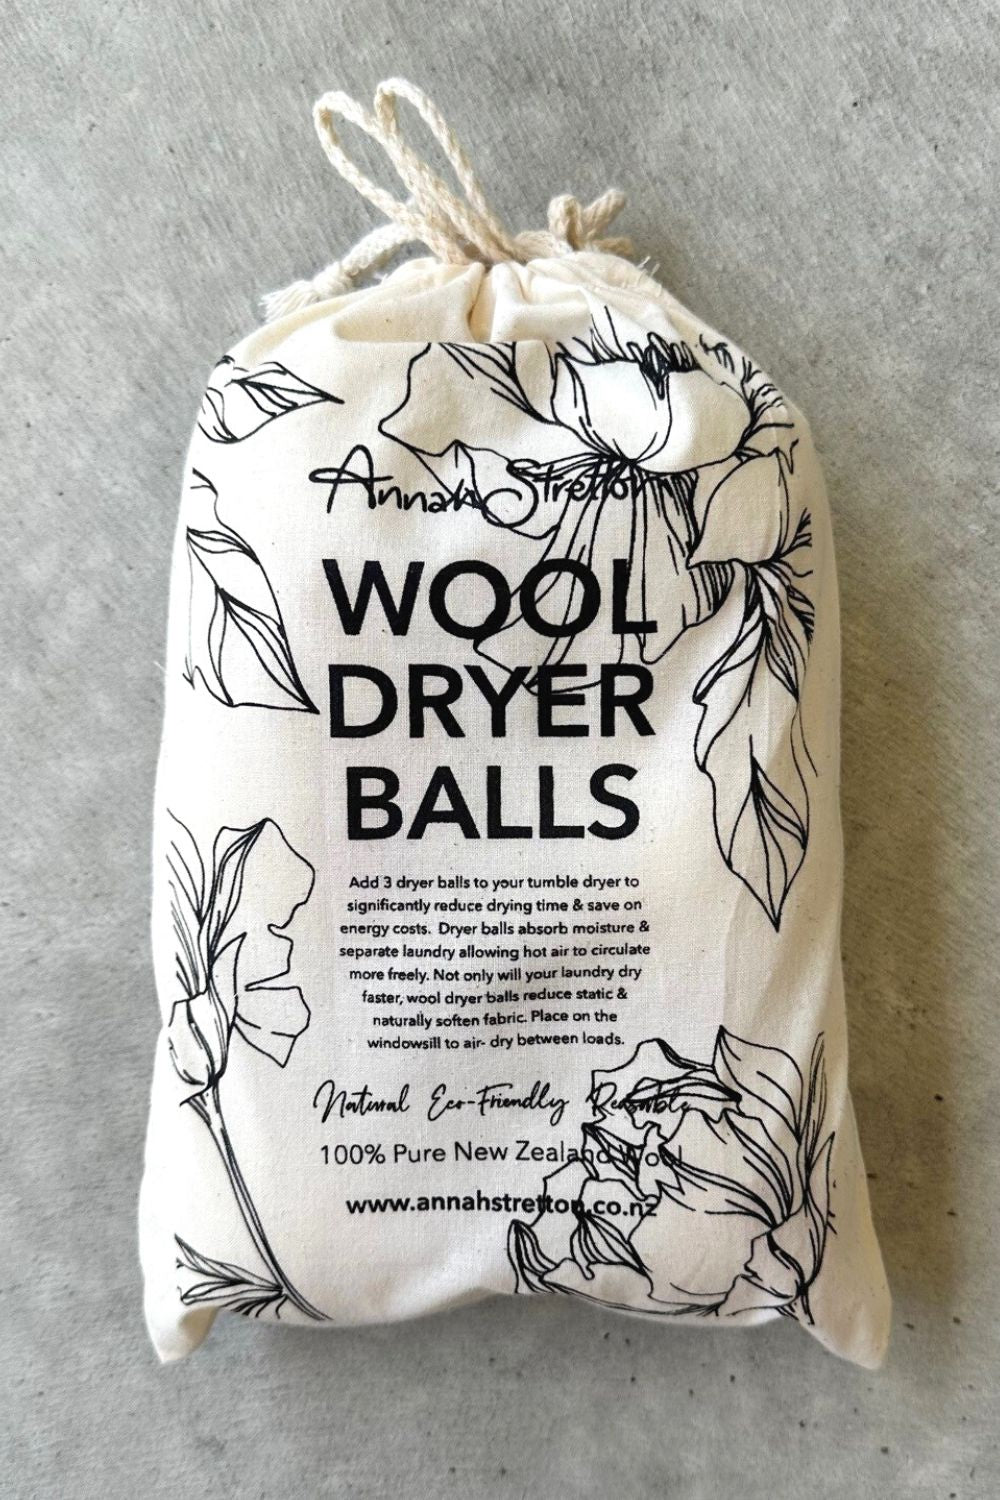 Front packaging of the Annah Stretton Peony Dryer Balls